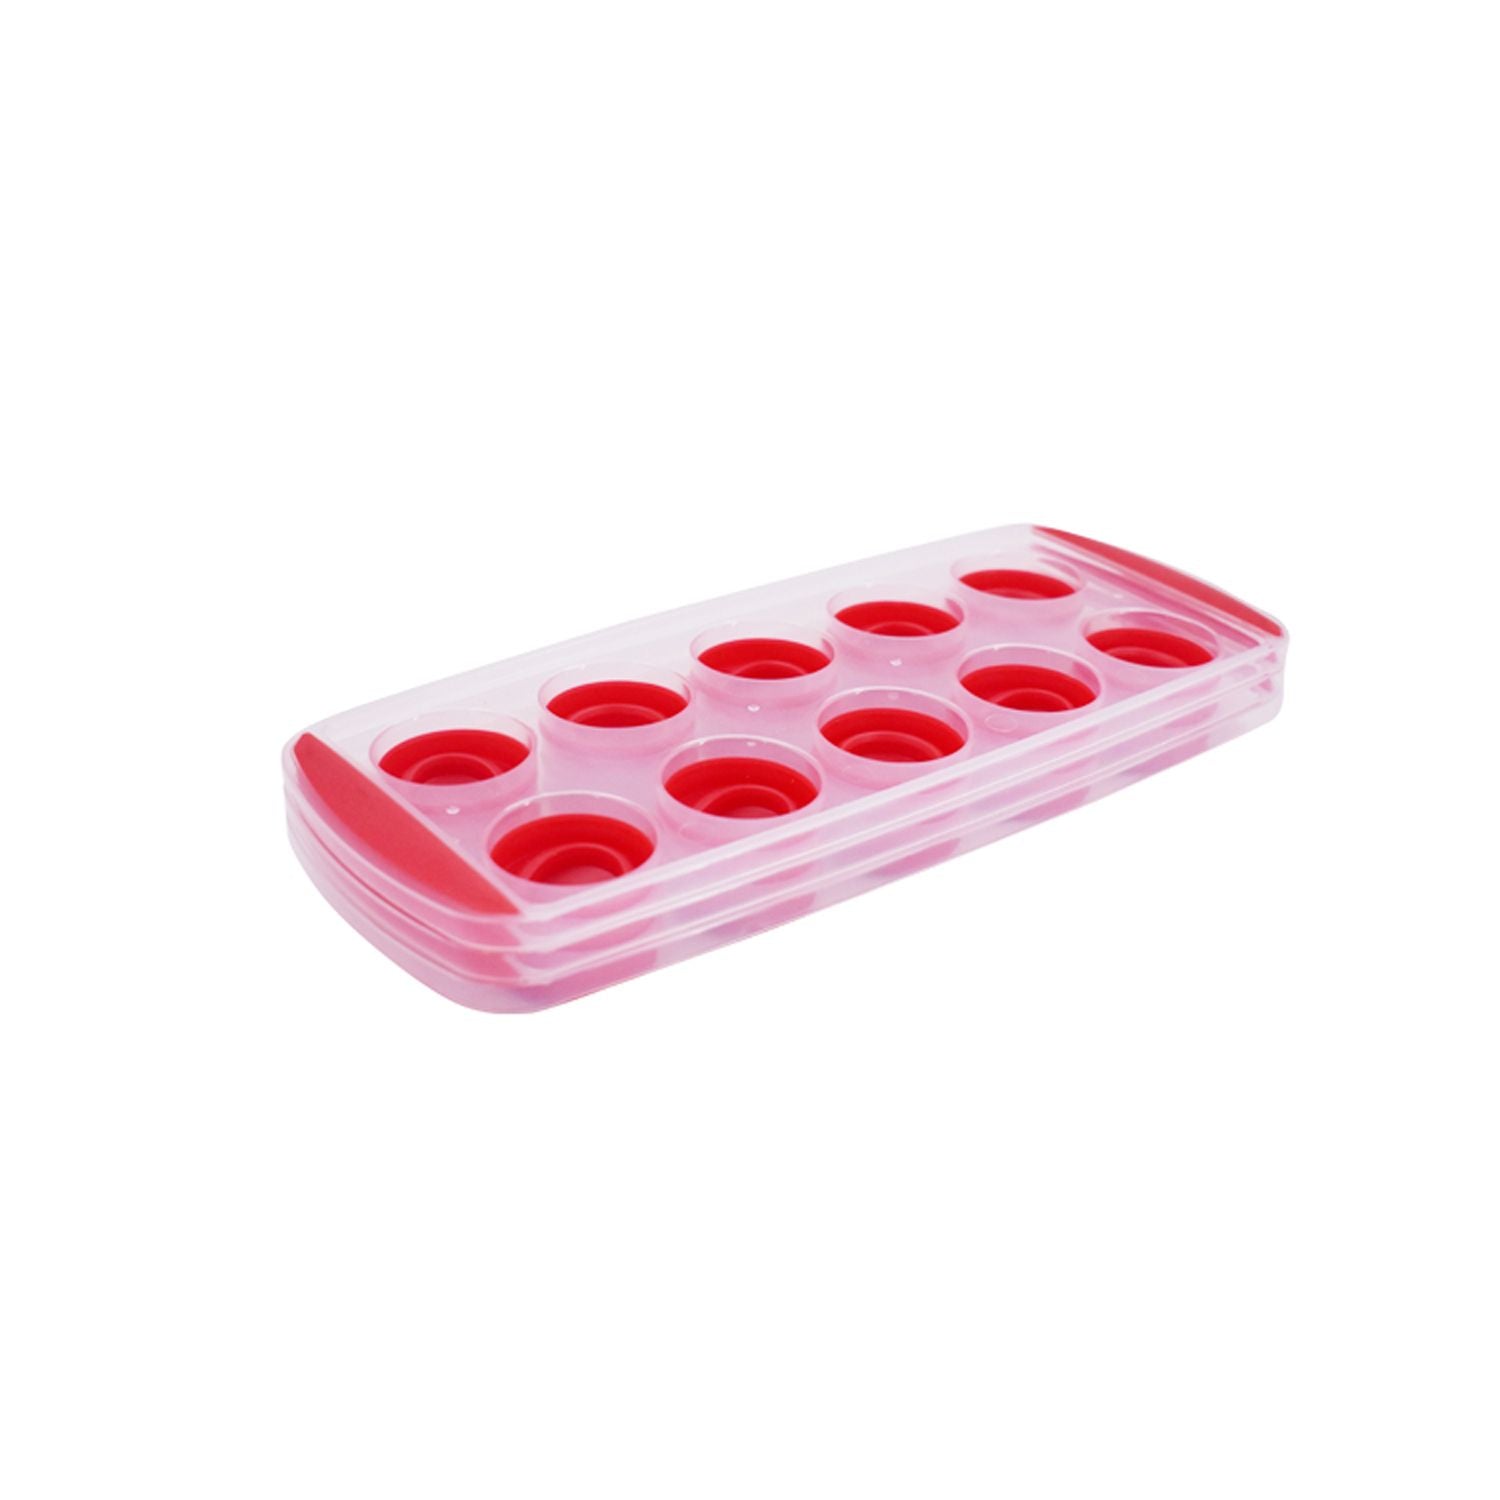 Flexible Silicone Ice Cube Tray 10 cubes, (Pack of 3) (P8002-3P-C)